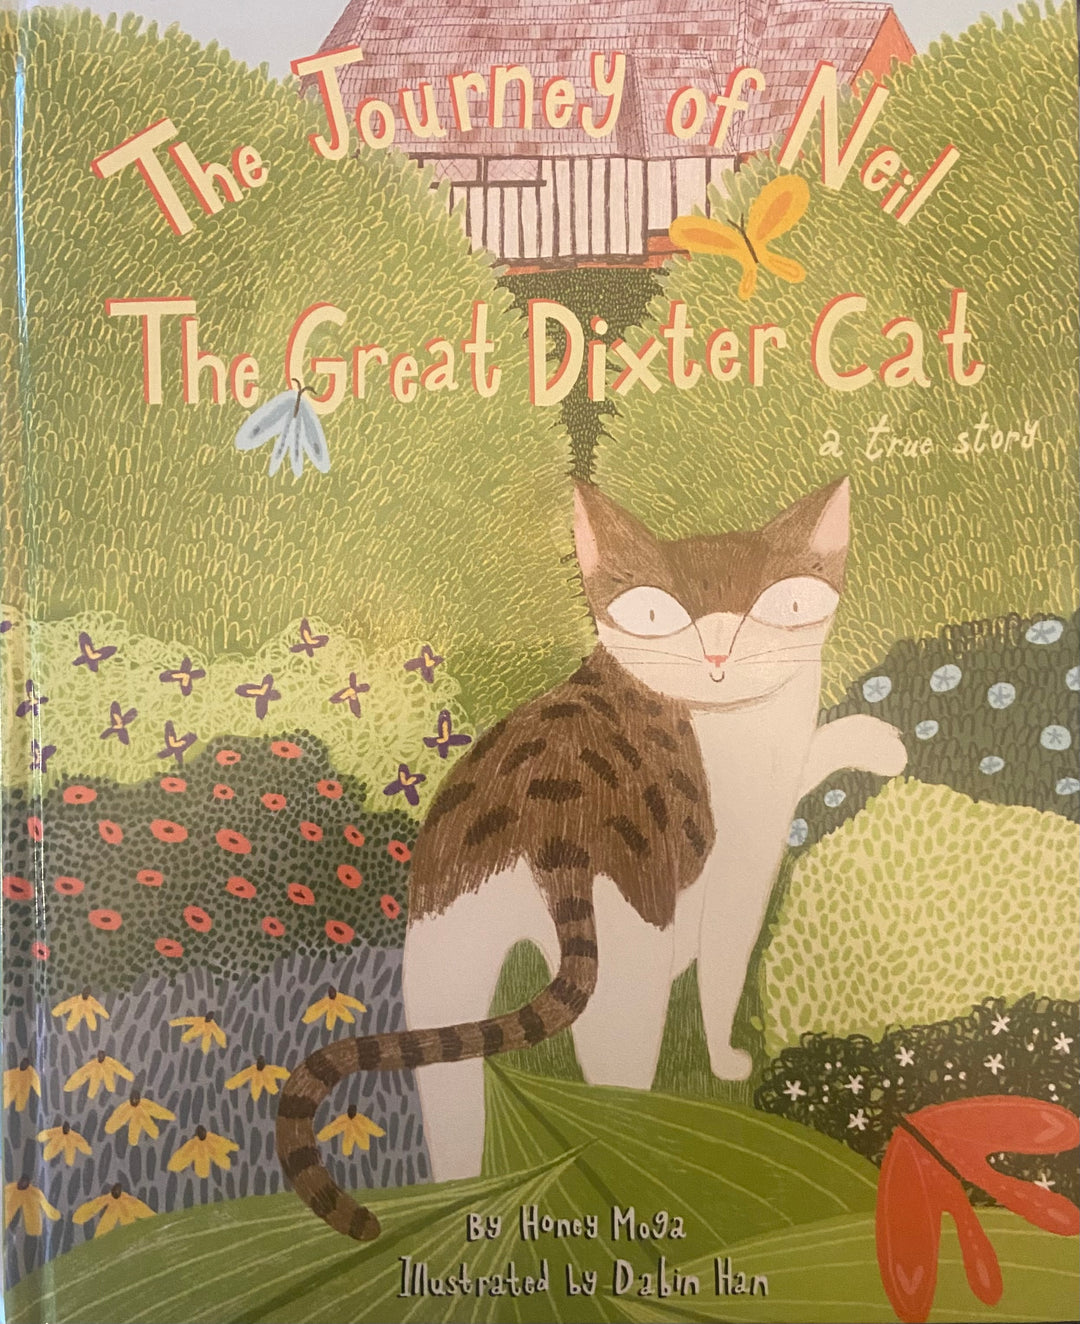 The Journey of Neil The Great Dixter Cat